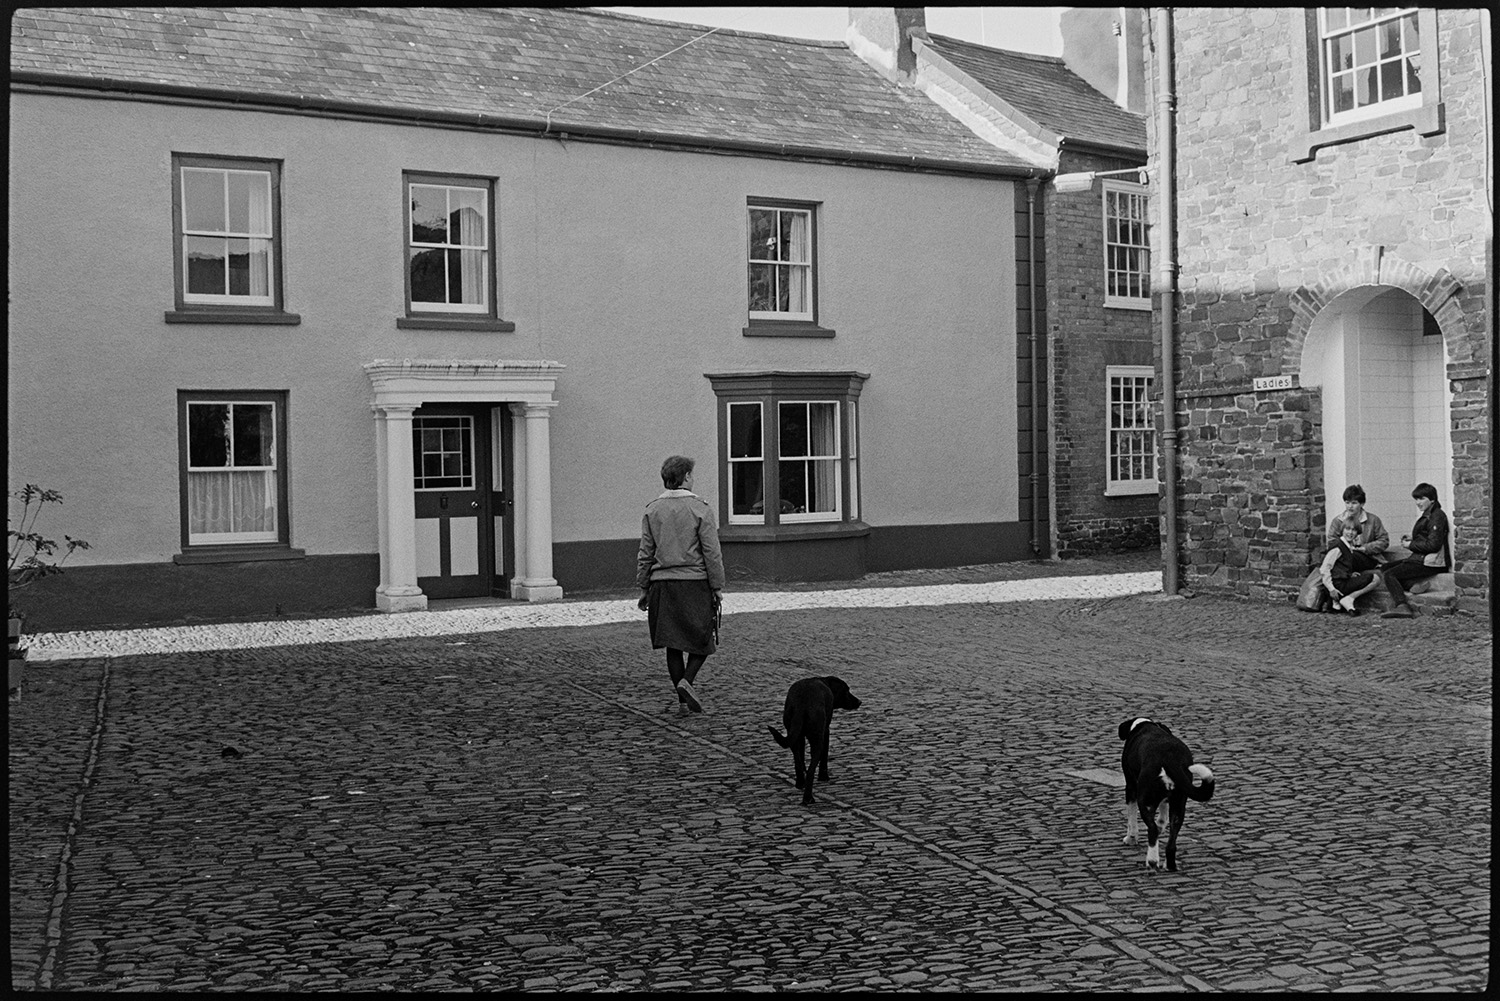 House and cobbled square, former school, porch. 
[A woman and two dogs walking along a cobbled square in front of a house, formerly the School House, in Chulmleigh. The front door has an entrance porch with two pillars. Three young girls are sat outside the entrance to the ladies toilets in the square.]